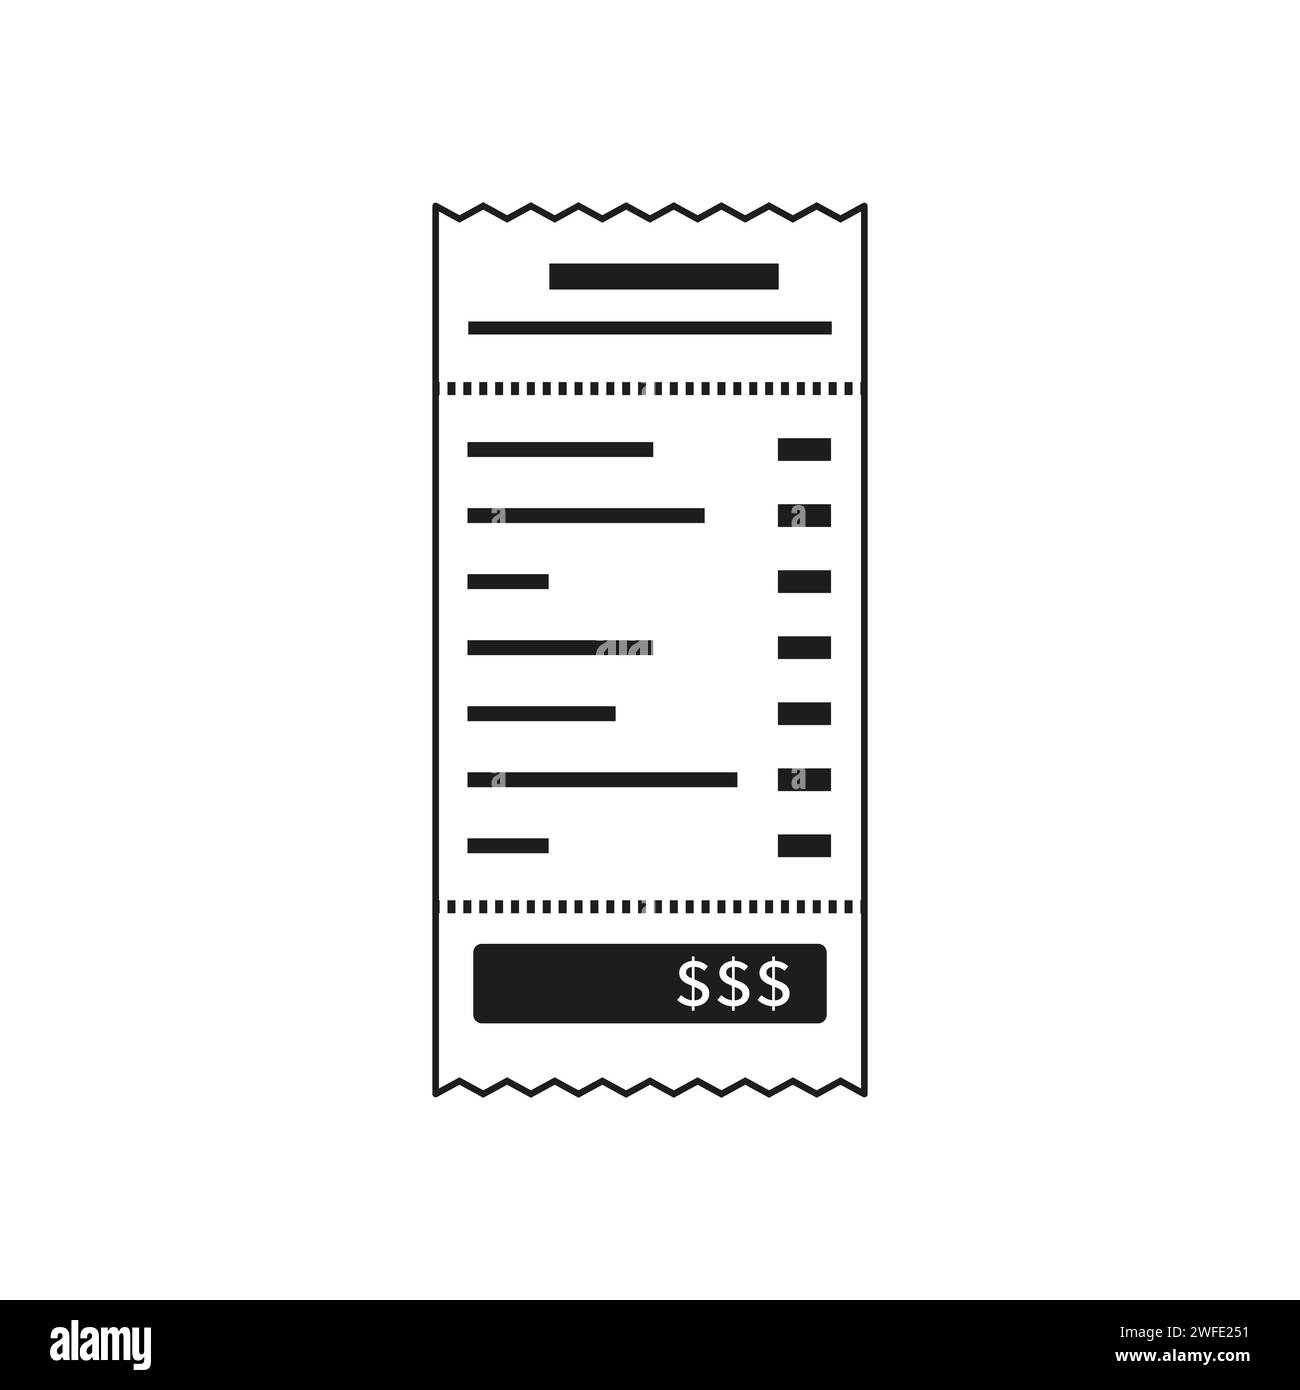 symbol receipt and payment of buying . Vector illustration. stock image. EPS 10. Stock Vector